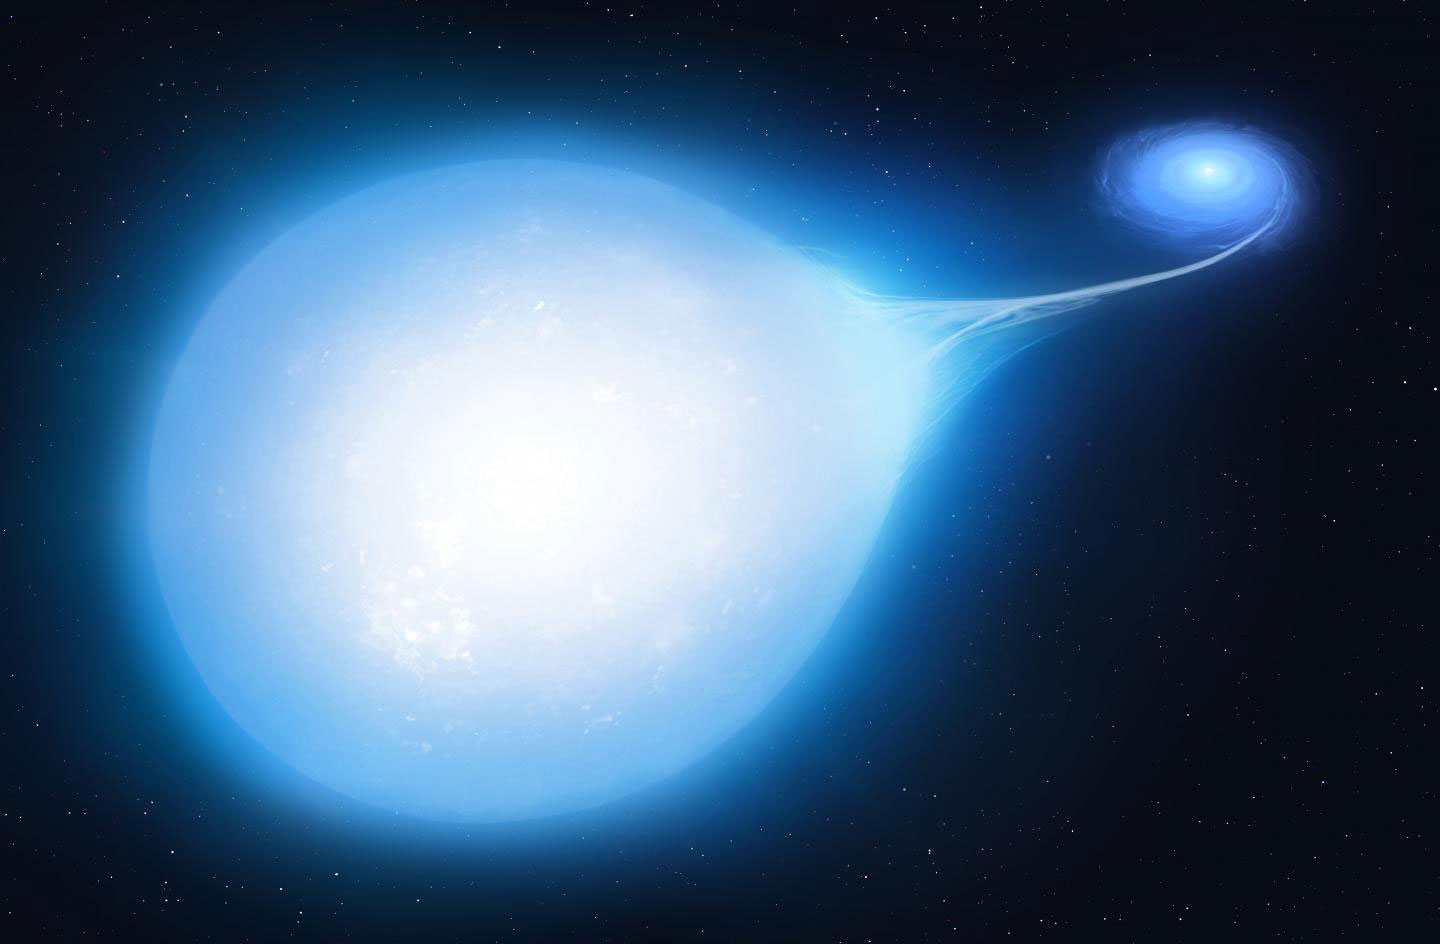 White dwarf and gravity